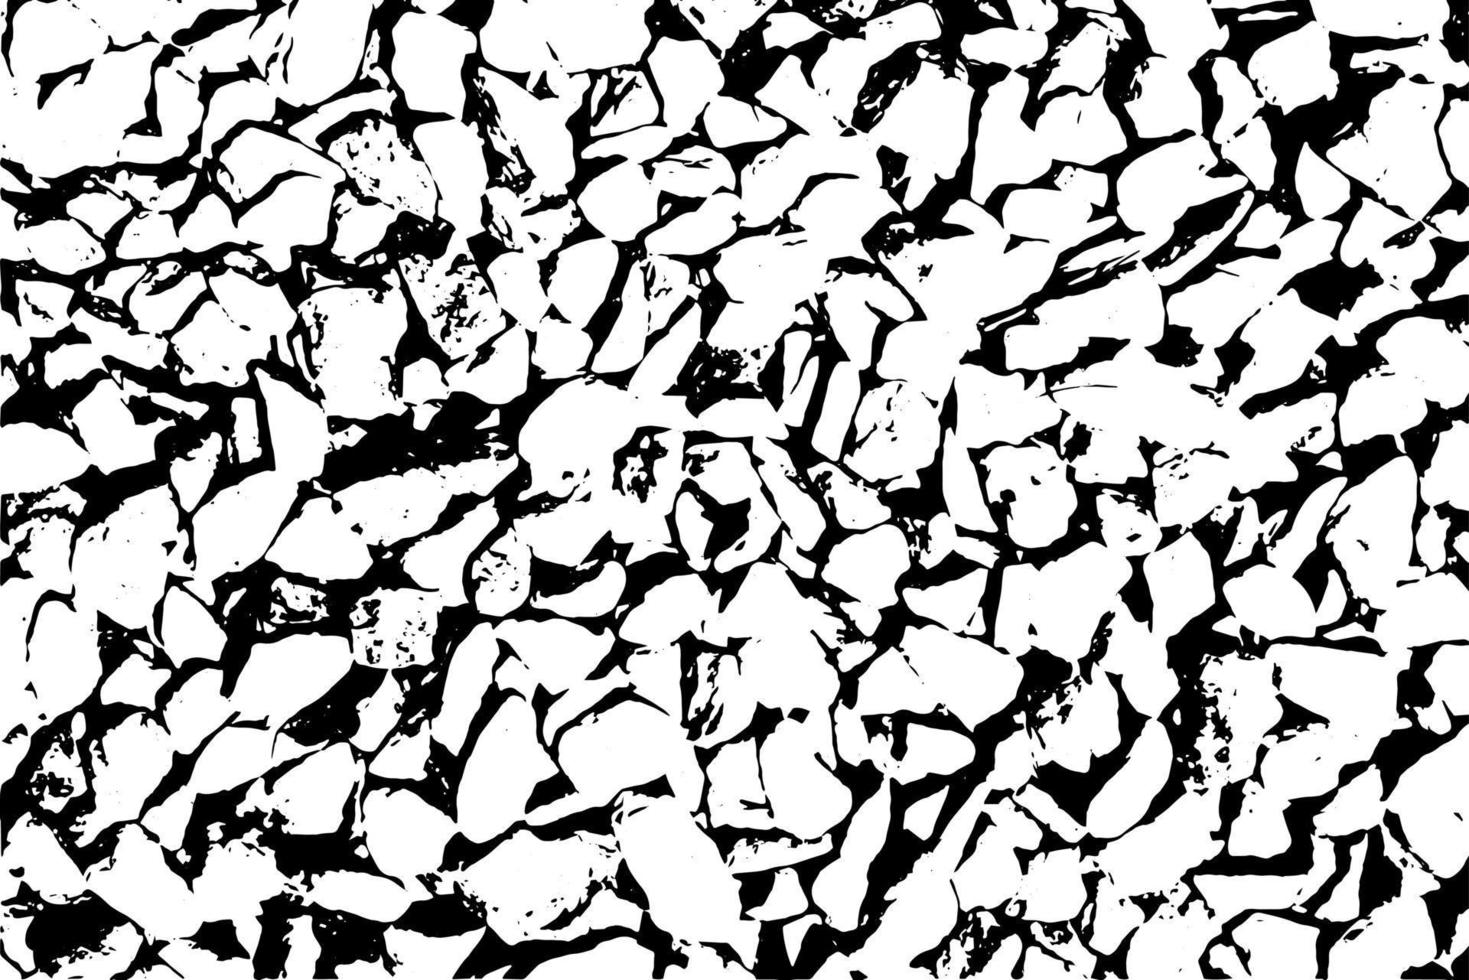 Grunge vector texture. Abstract cracked background. Aged and weathered broken surface. Dirty and damaged. Detailed rough backdrop.